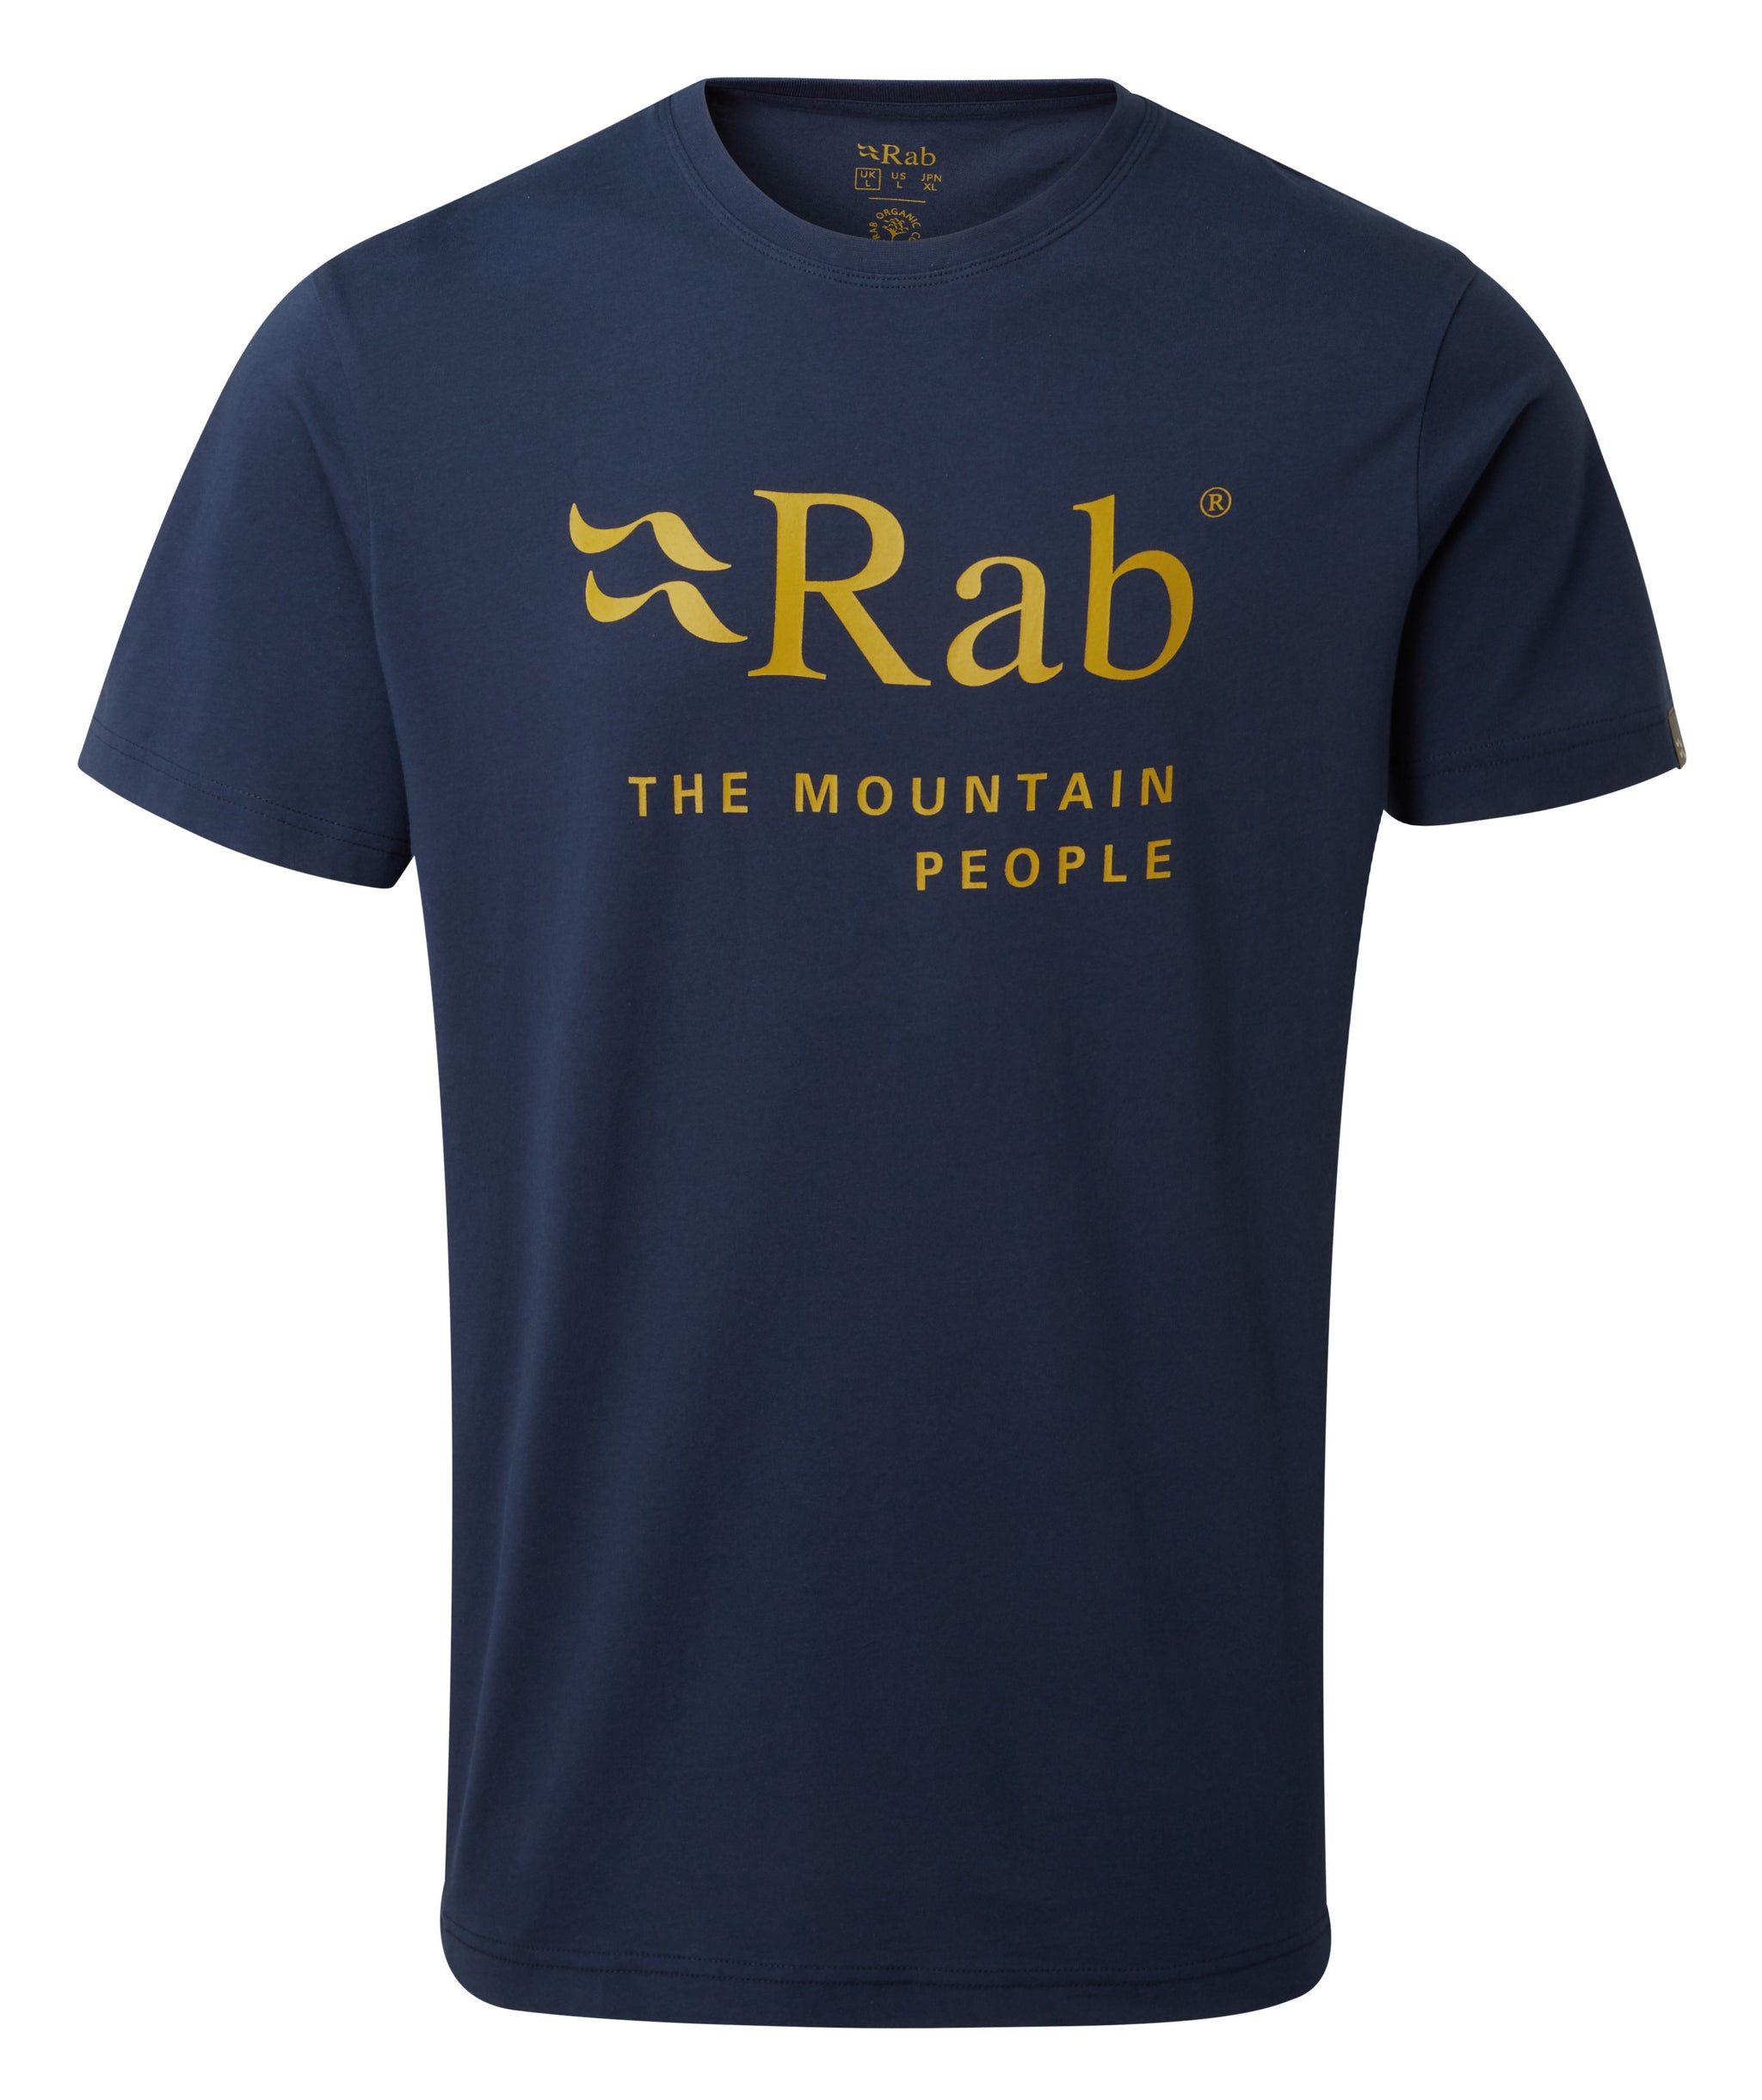 Buy Rab Outdoor Clothing & Gear Online | Outfitters NZ - outfittersstore.nz